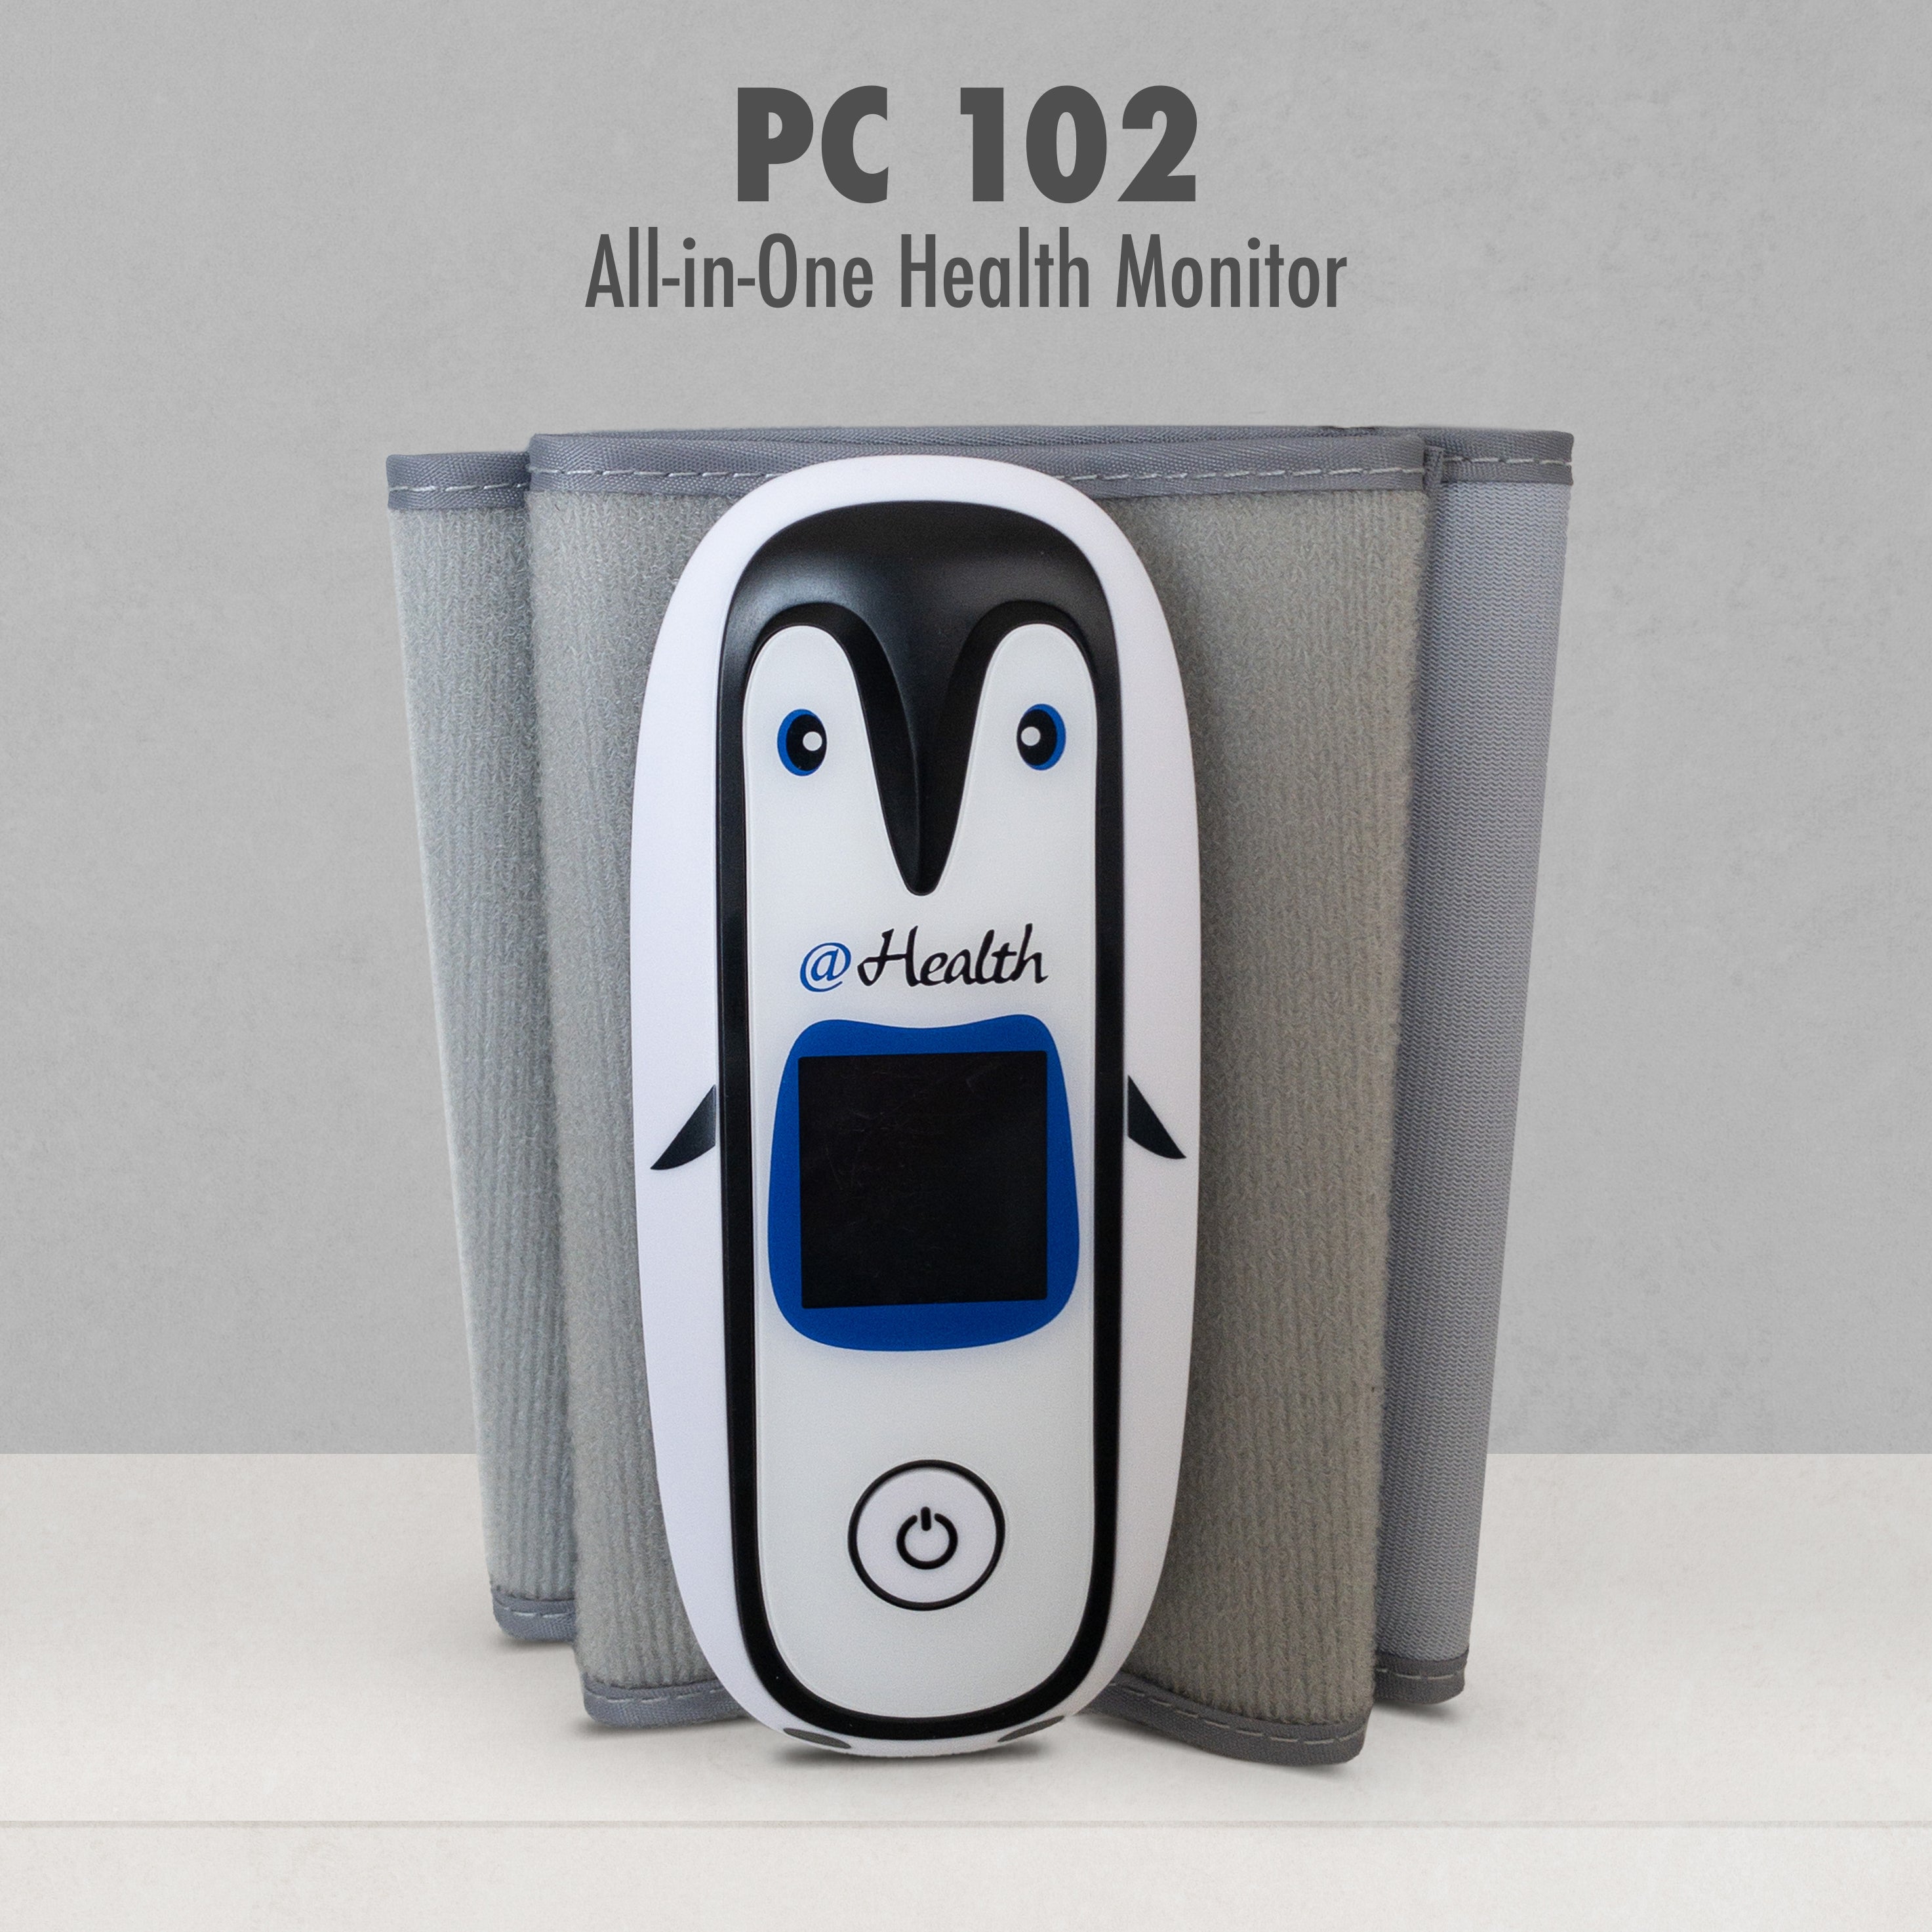 FDA Continuous Monitoring Ambulatory Blood Pressure Monitor with PC Software